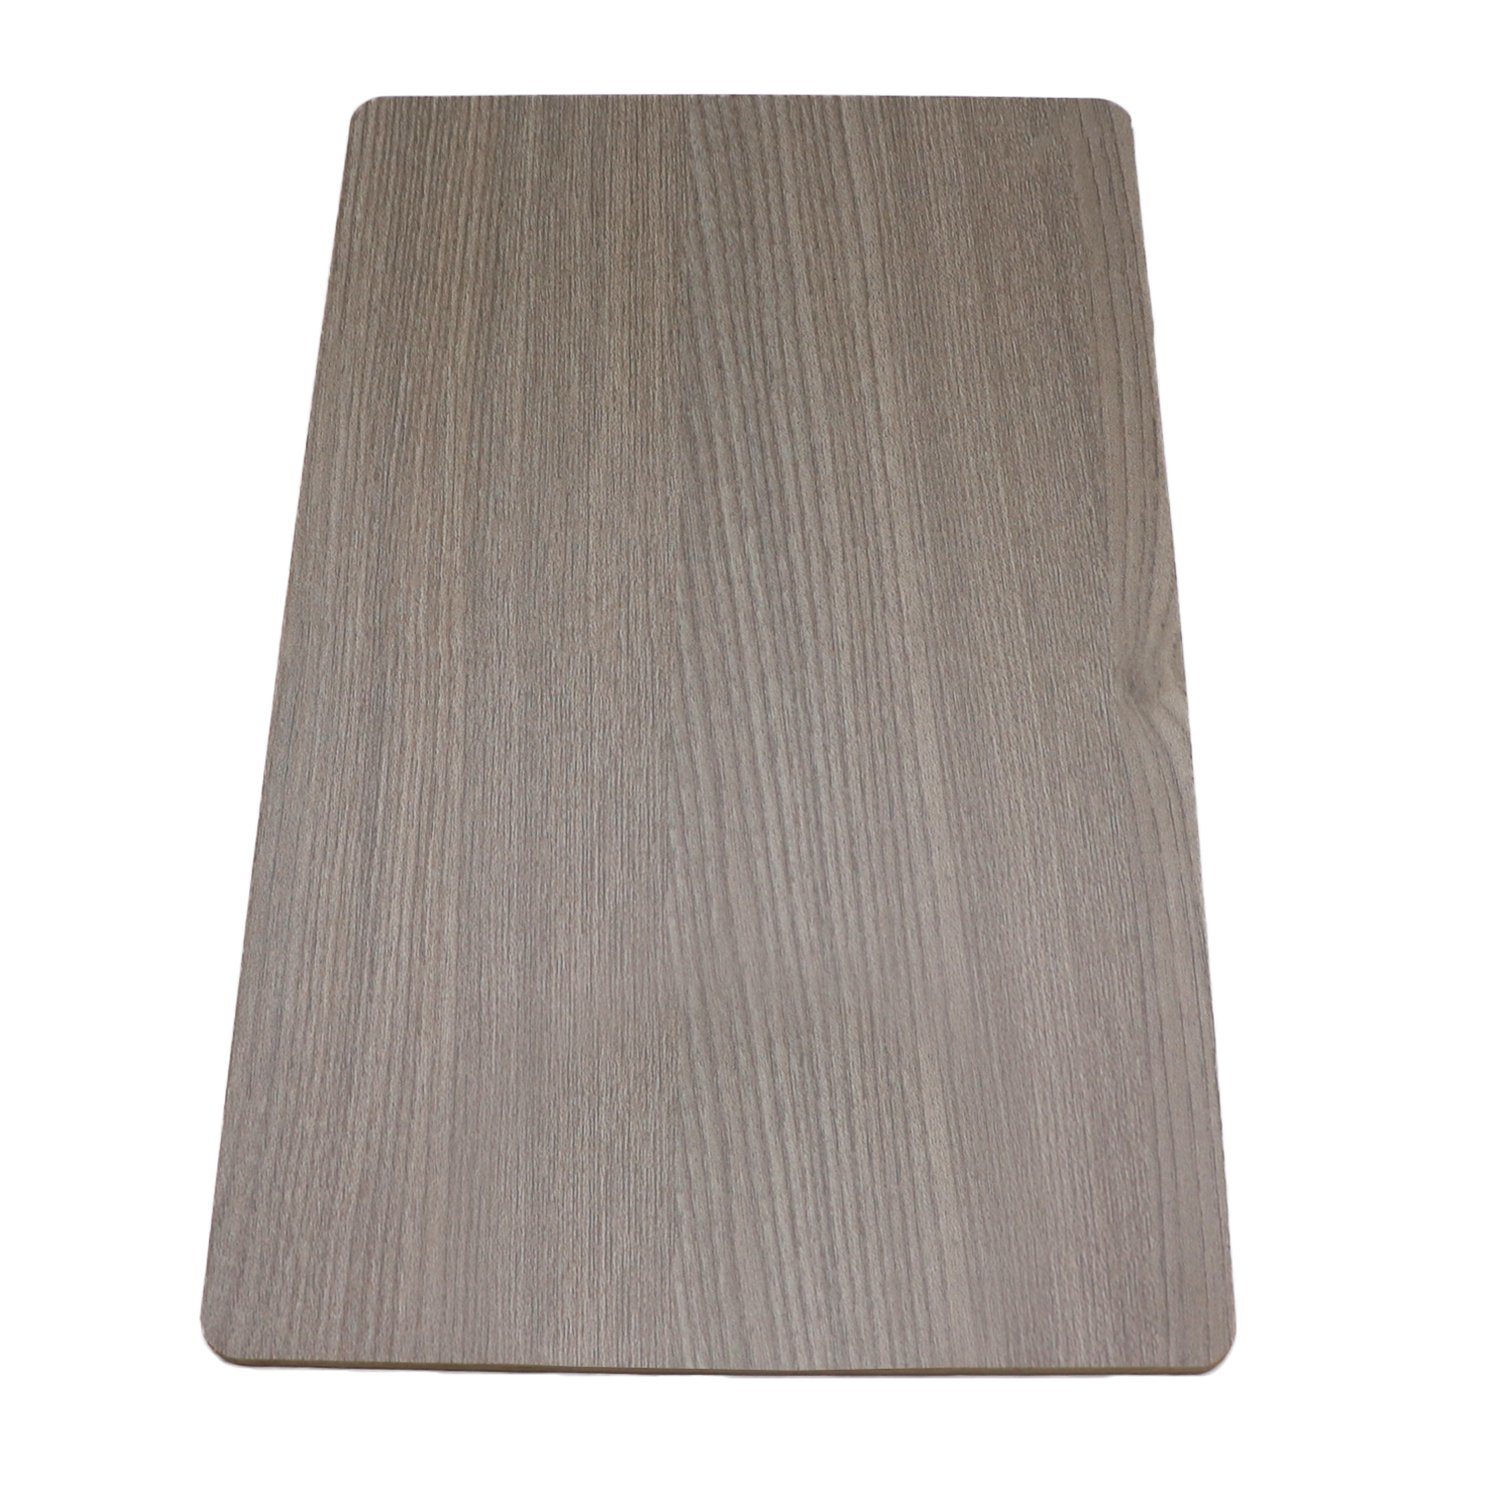 Different Design Melamine Plywood Multi Woodgrain Paper Film Faced Plywood Board for Furniture